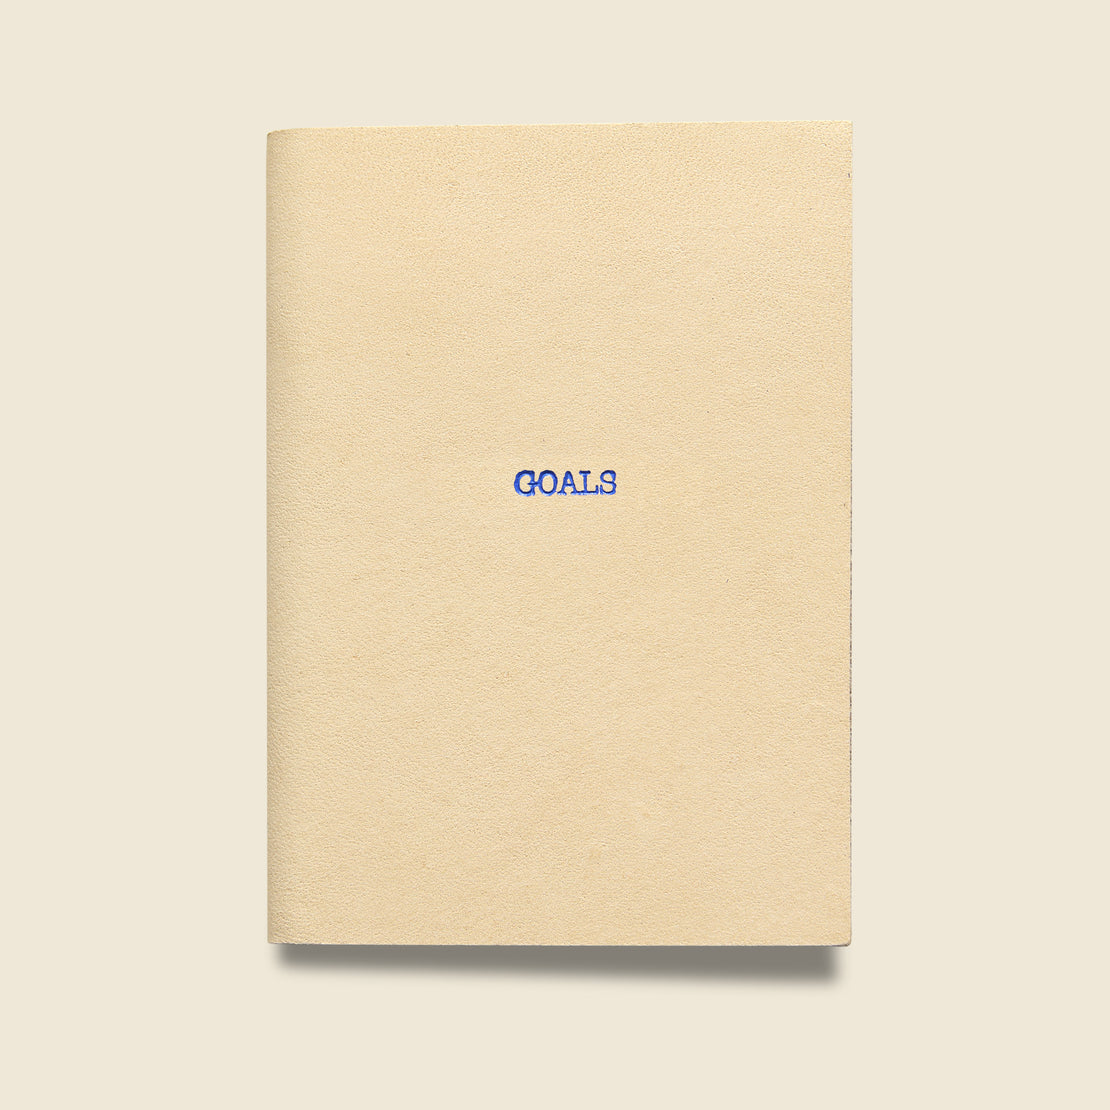 Paper Goods "GOALS" Leather Journal - Natural